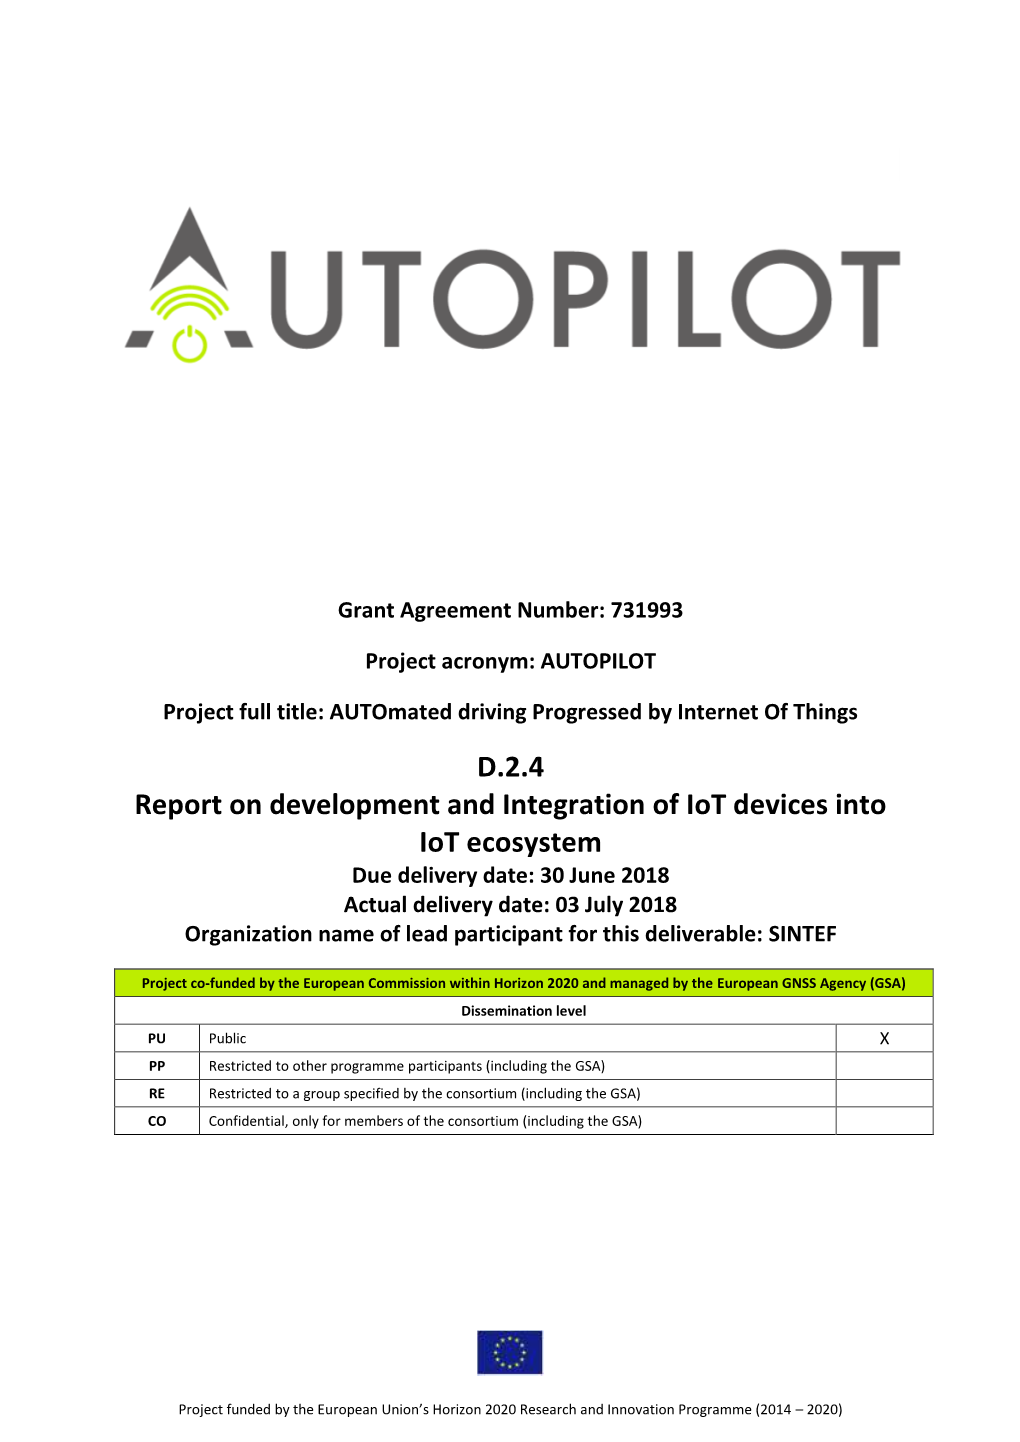 Report on Development and Integration of Iot Devices